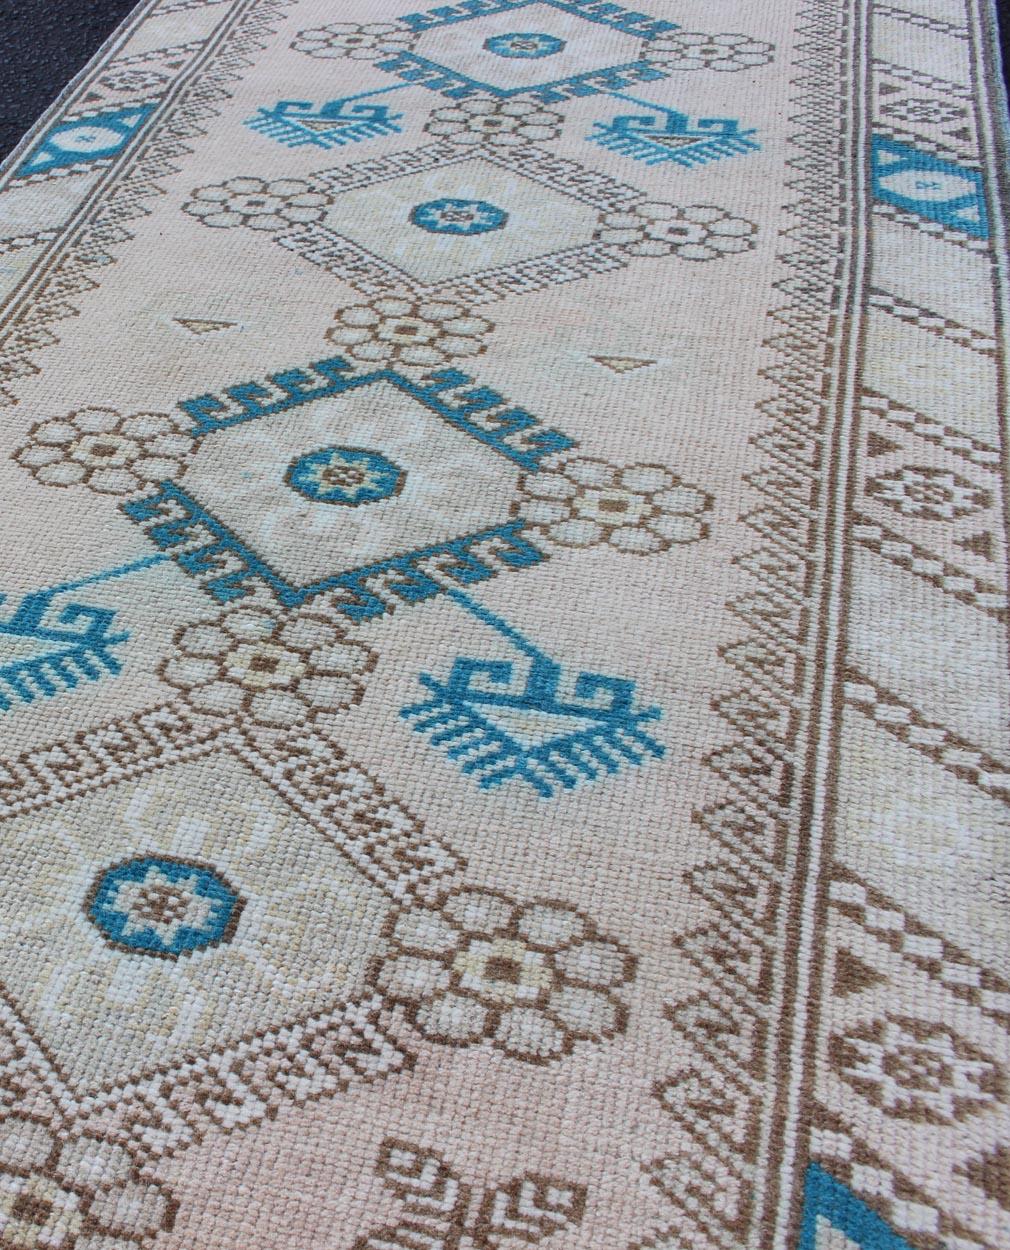 20th Century Tribal Design Vintage Turkish Oushak Runner with Blue, Teal, Taupe and Cream